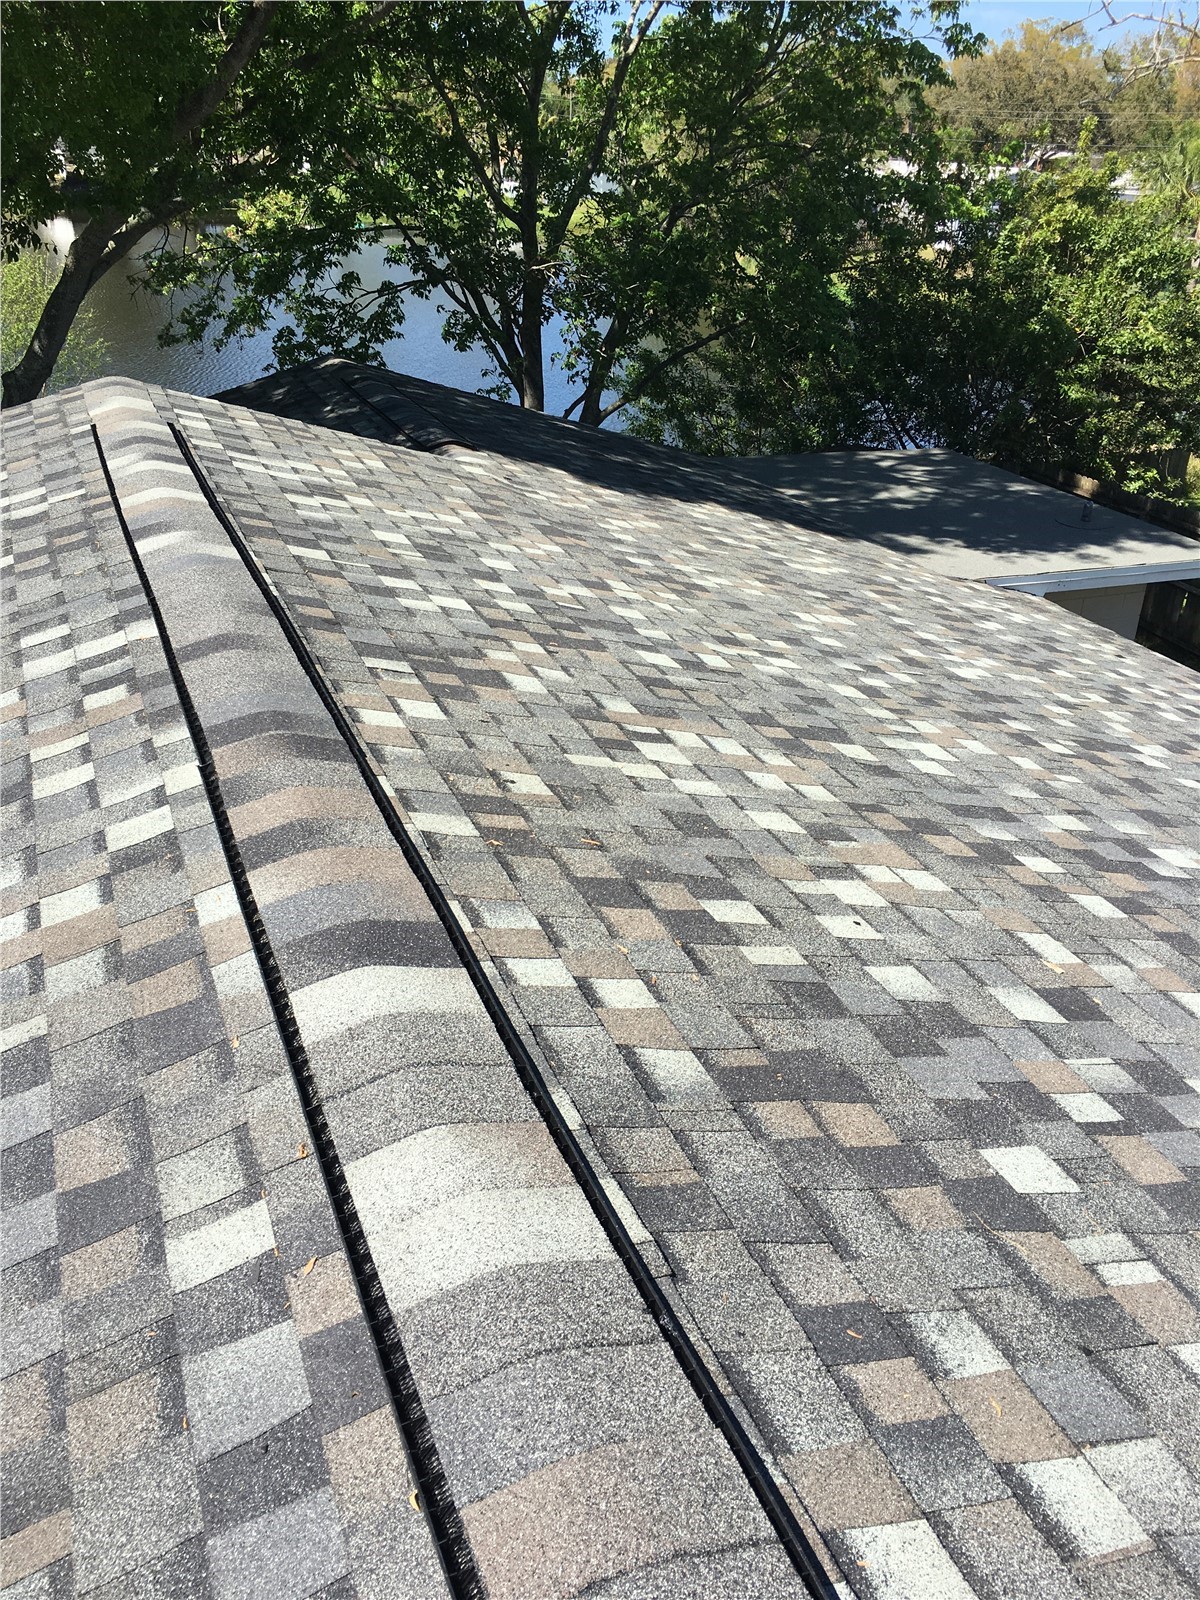 Choosing Materials for Your Tampa Bay Roof Replacement